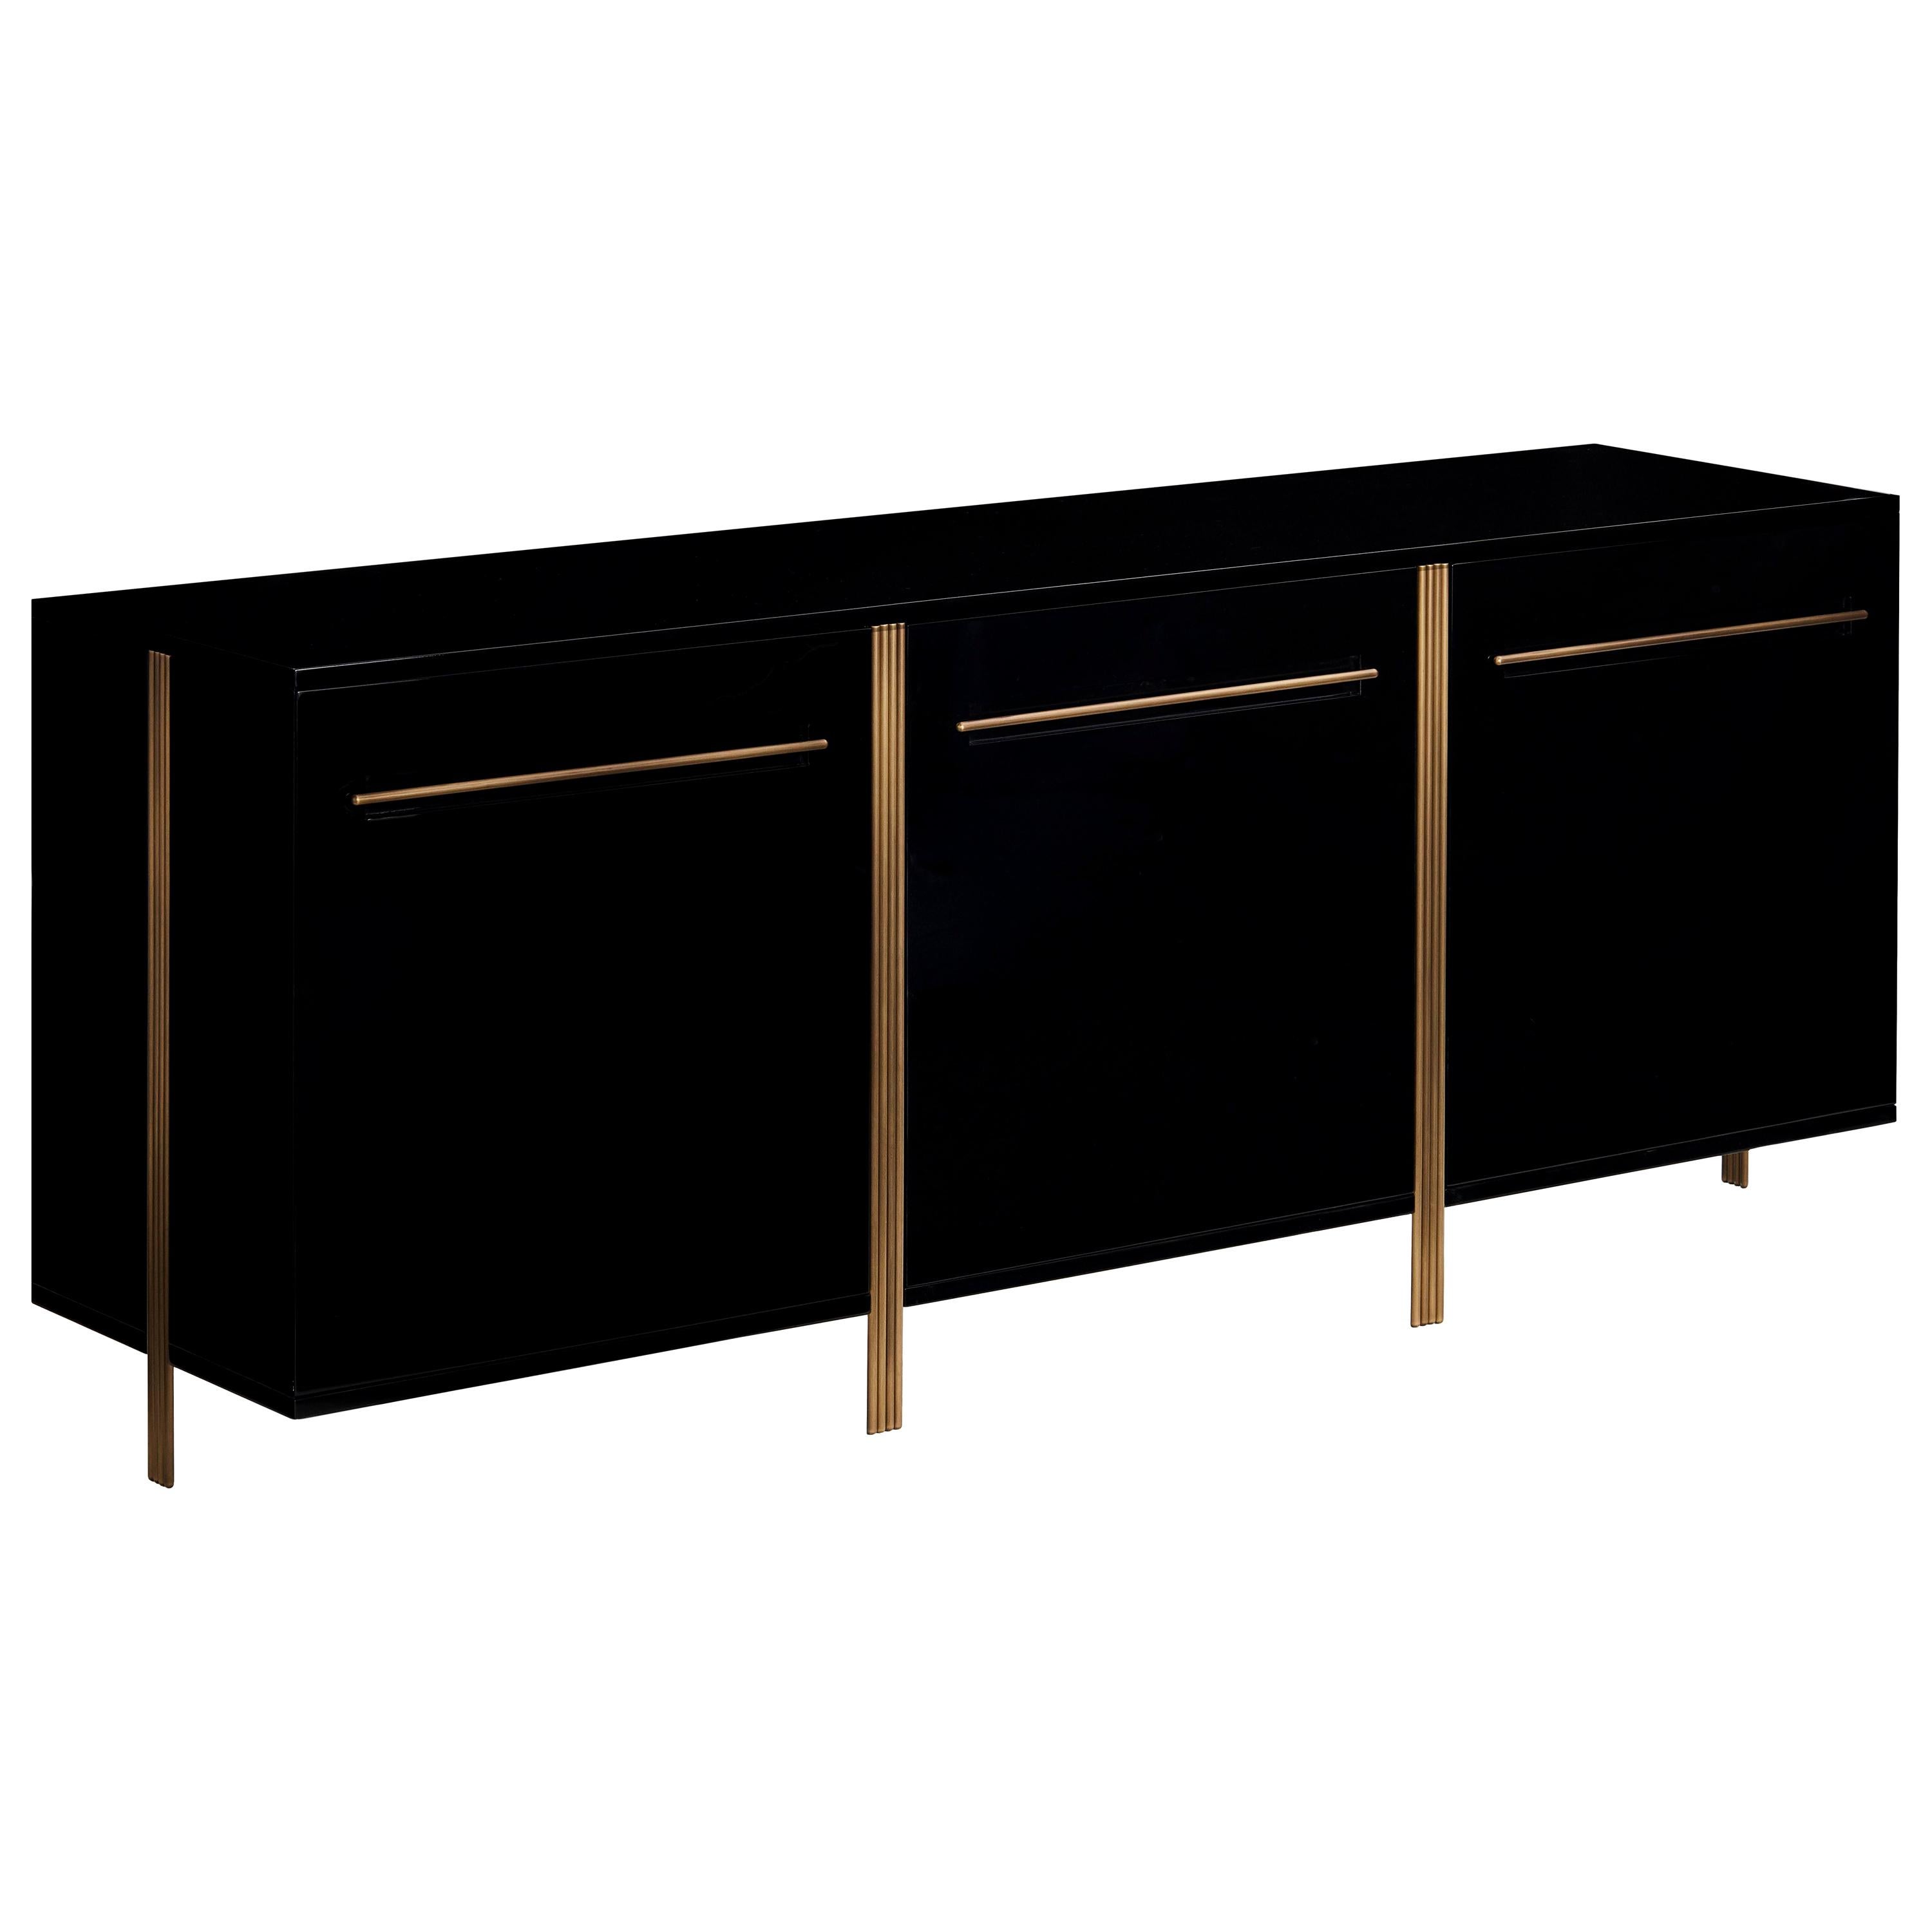 VERSAGA sideboard in custom colors with Antique Brass handles and feet